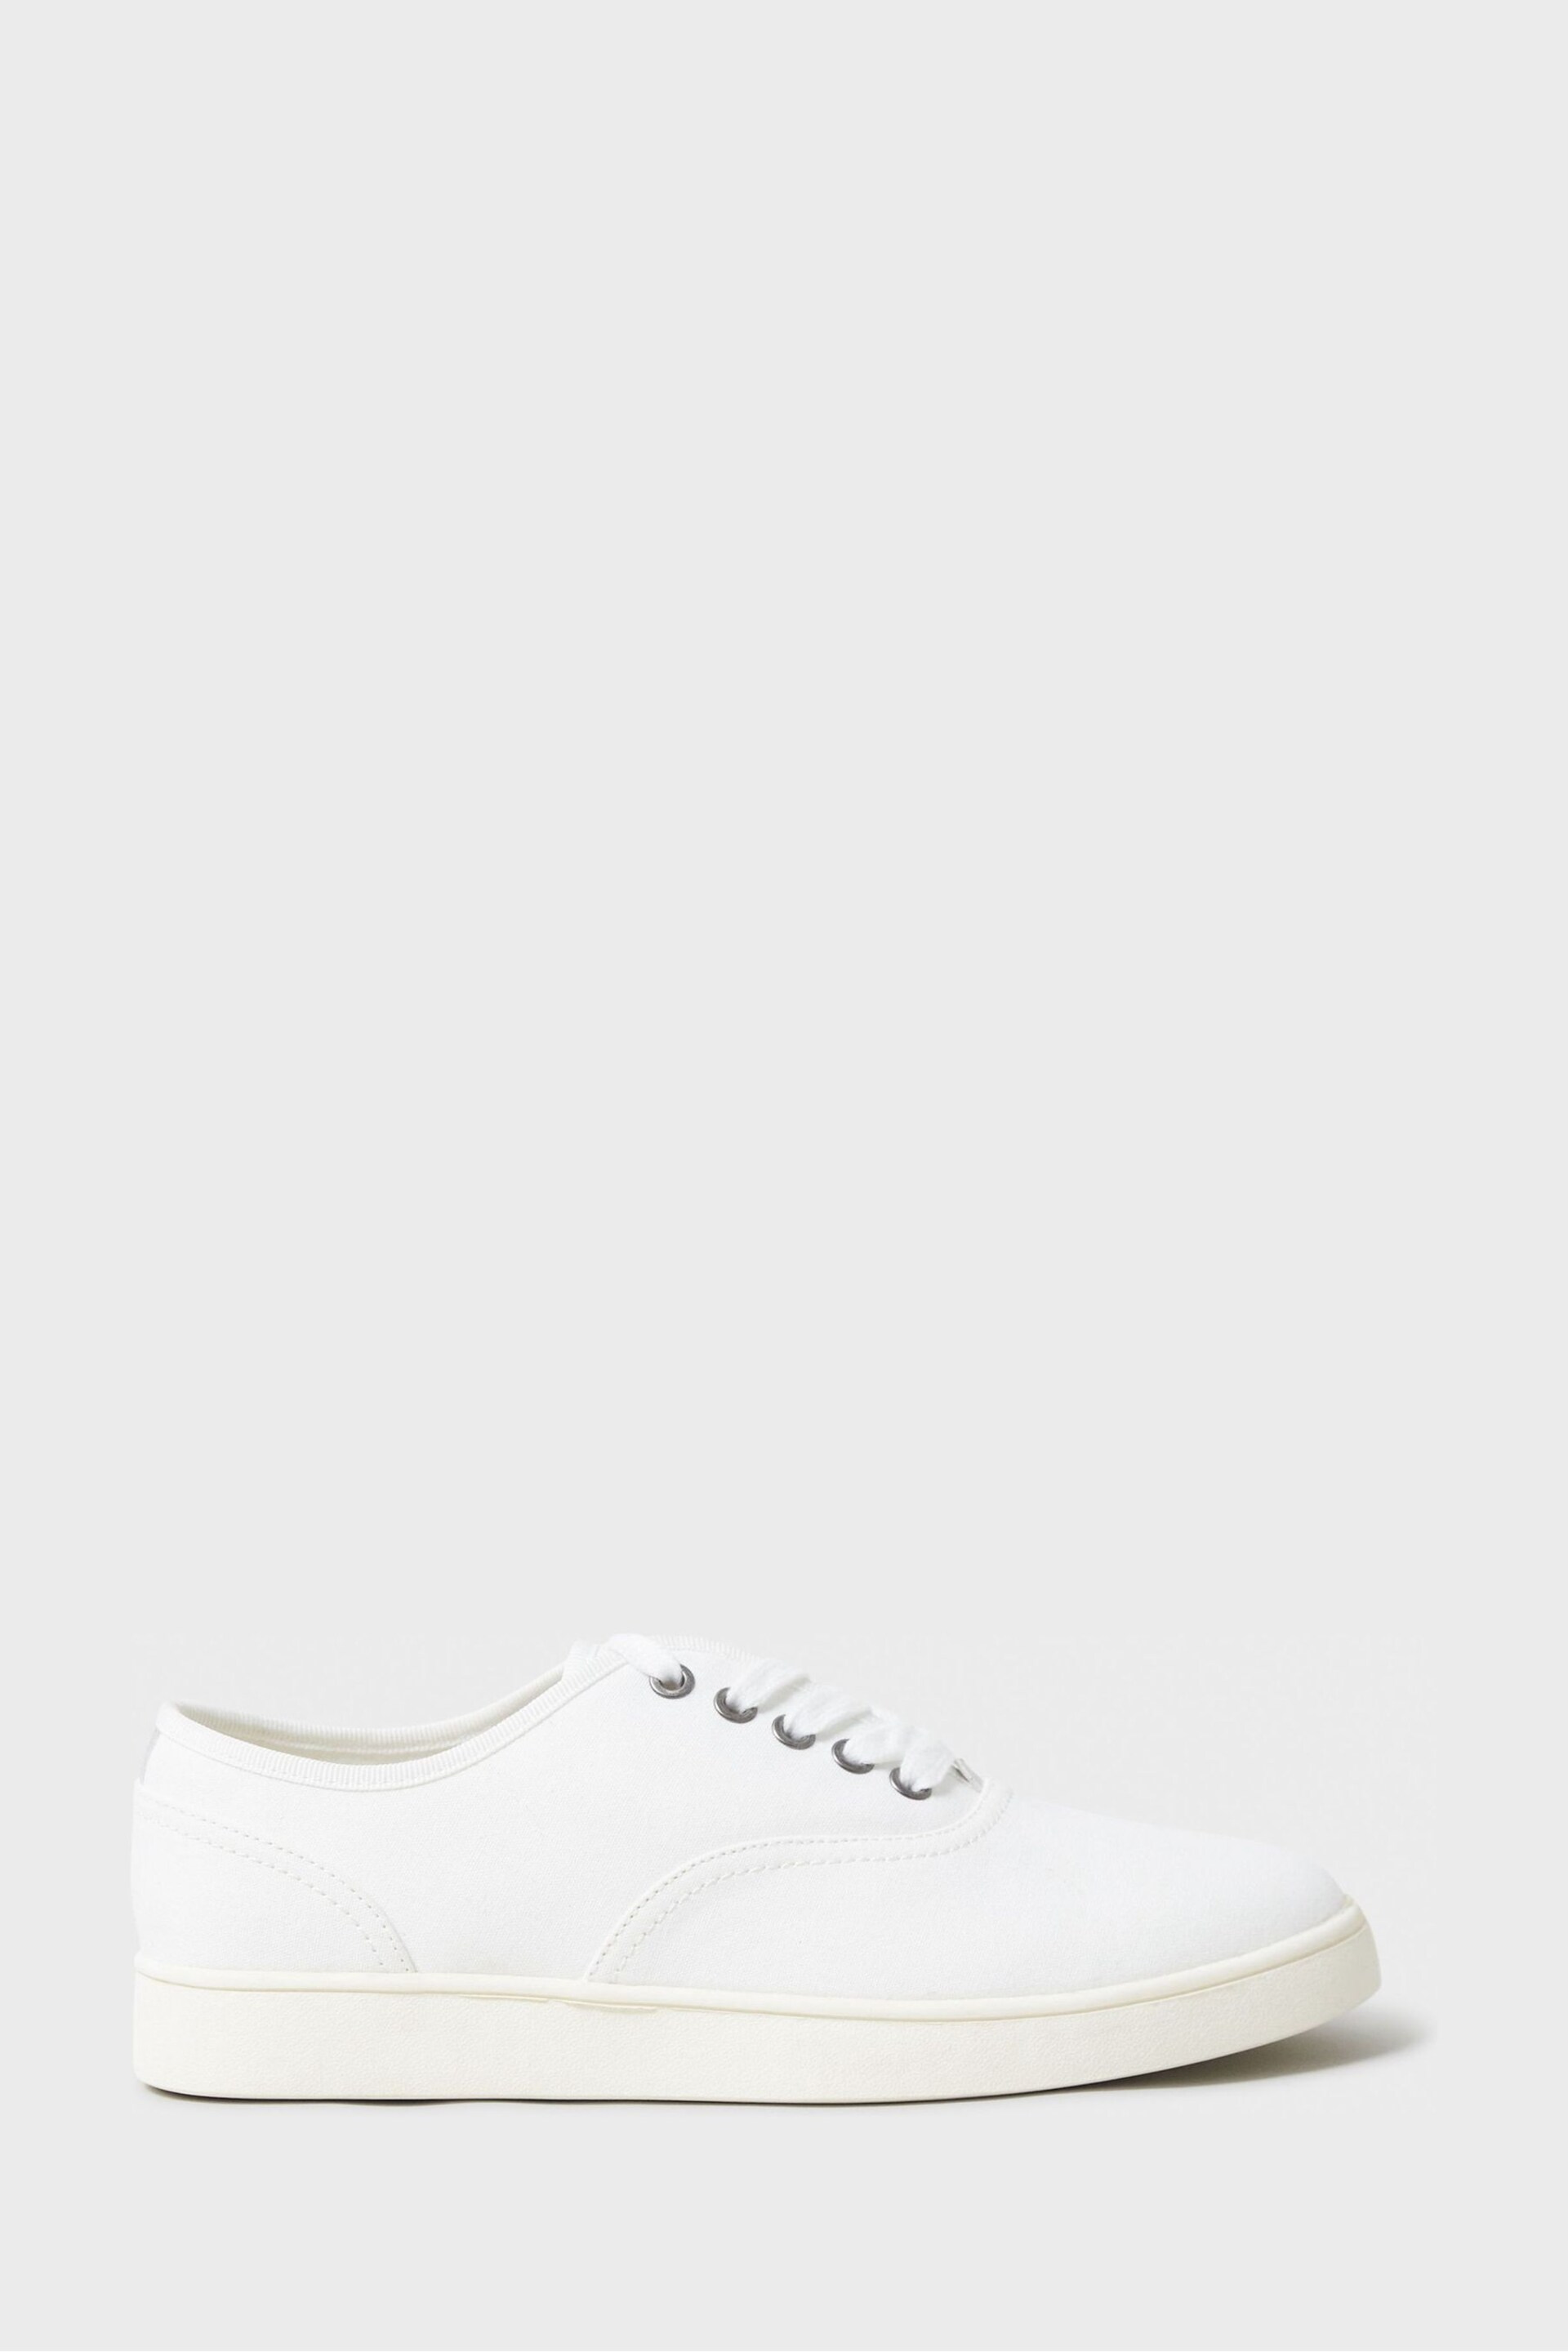 Crew Clothing Canvas Lace Up Trainers - Image 4 of 5